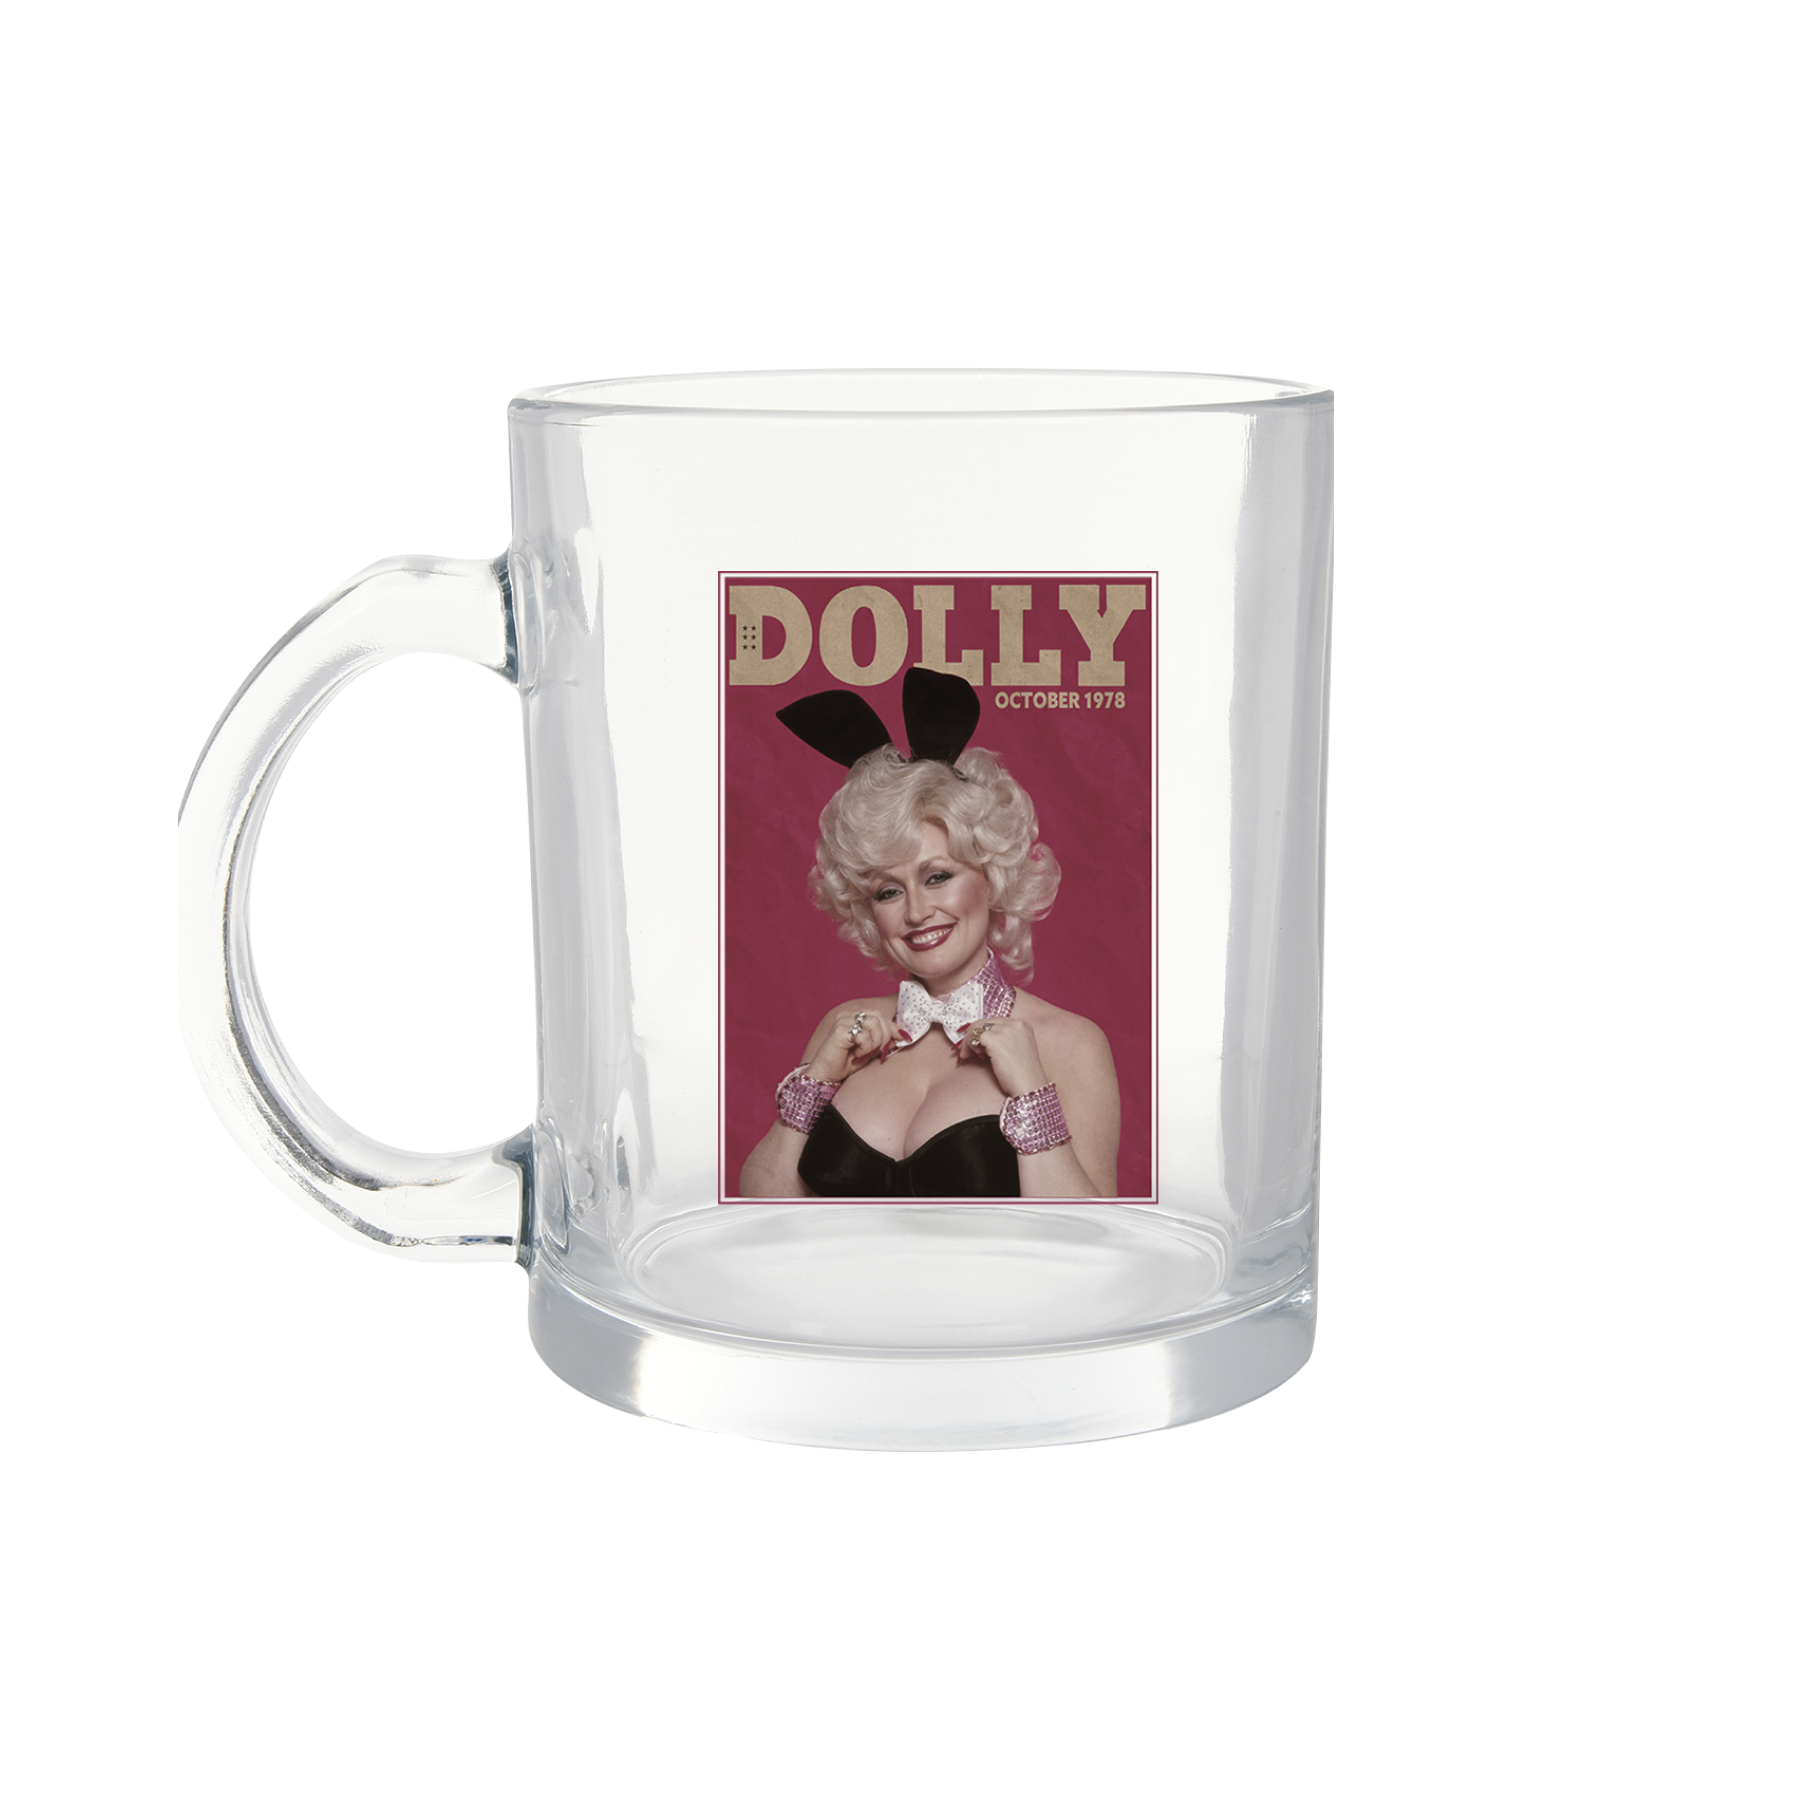 Official Dolly Parton Merchandise. Dolly Parton Bunny 1978 Playboy cover Image clear glass mug with the iconic magazine cover printed on one side.